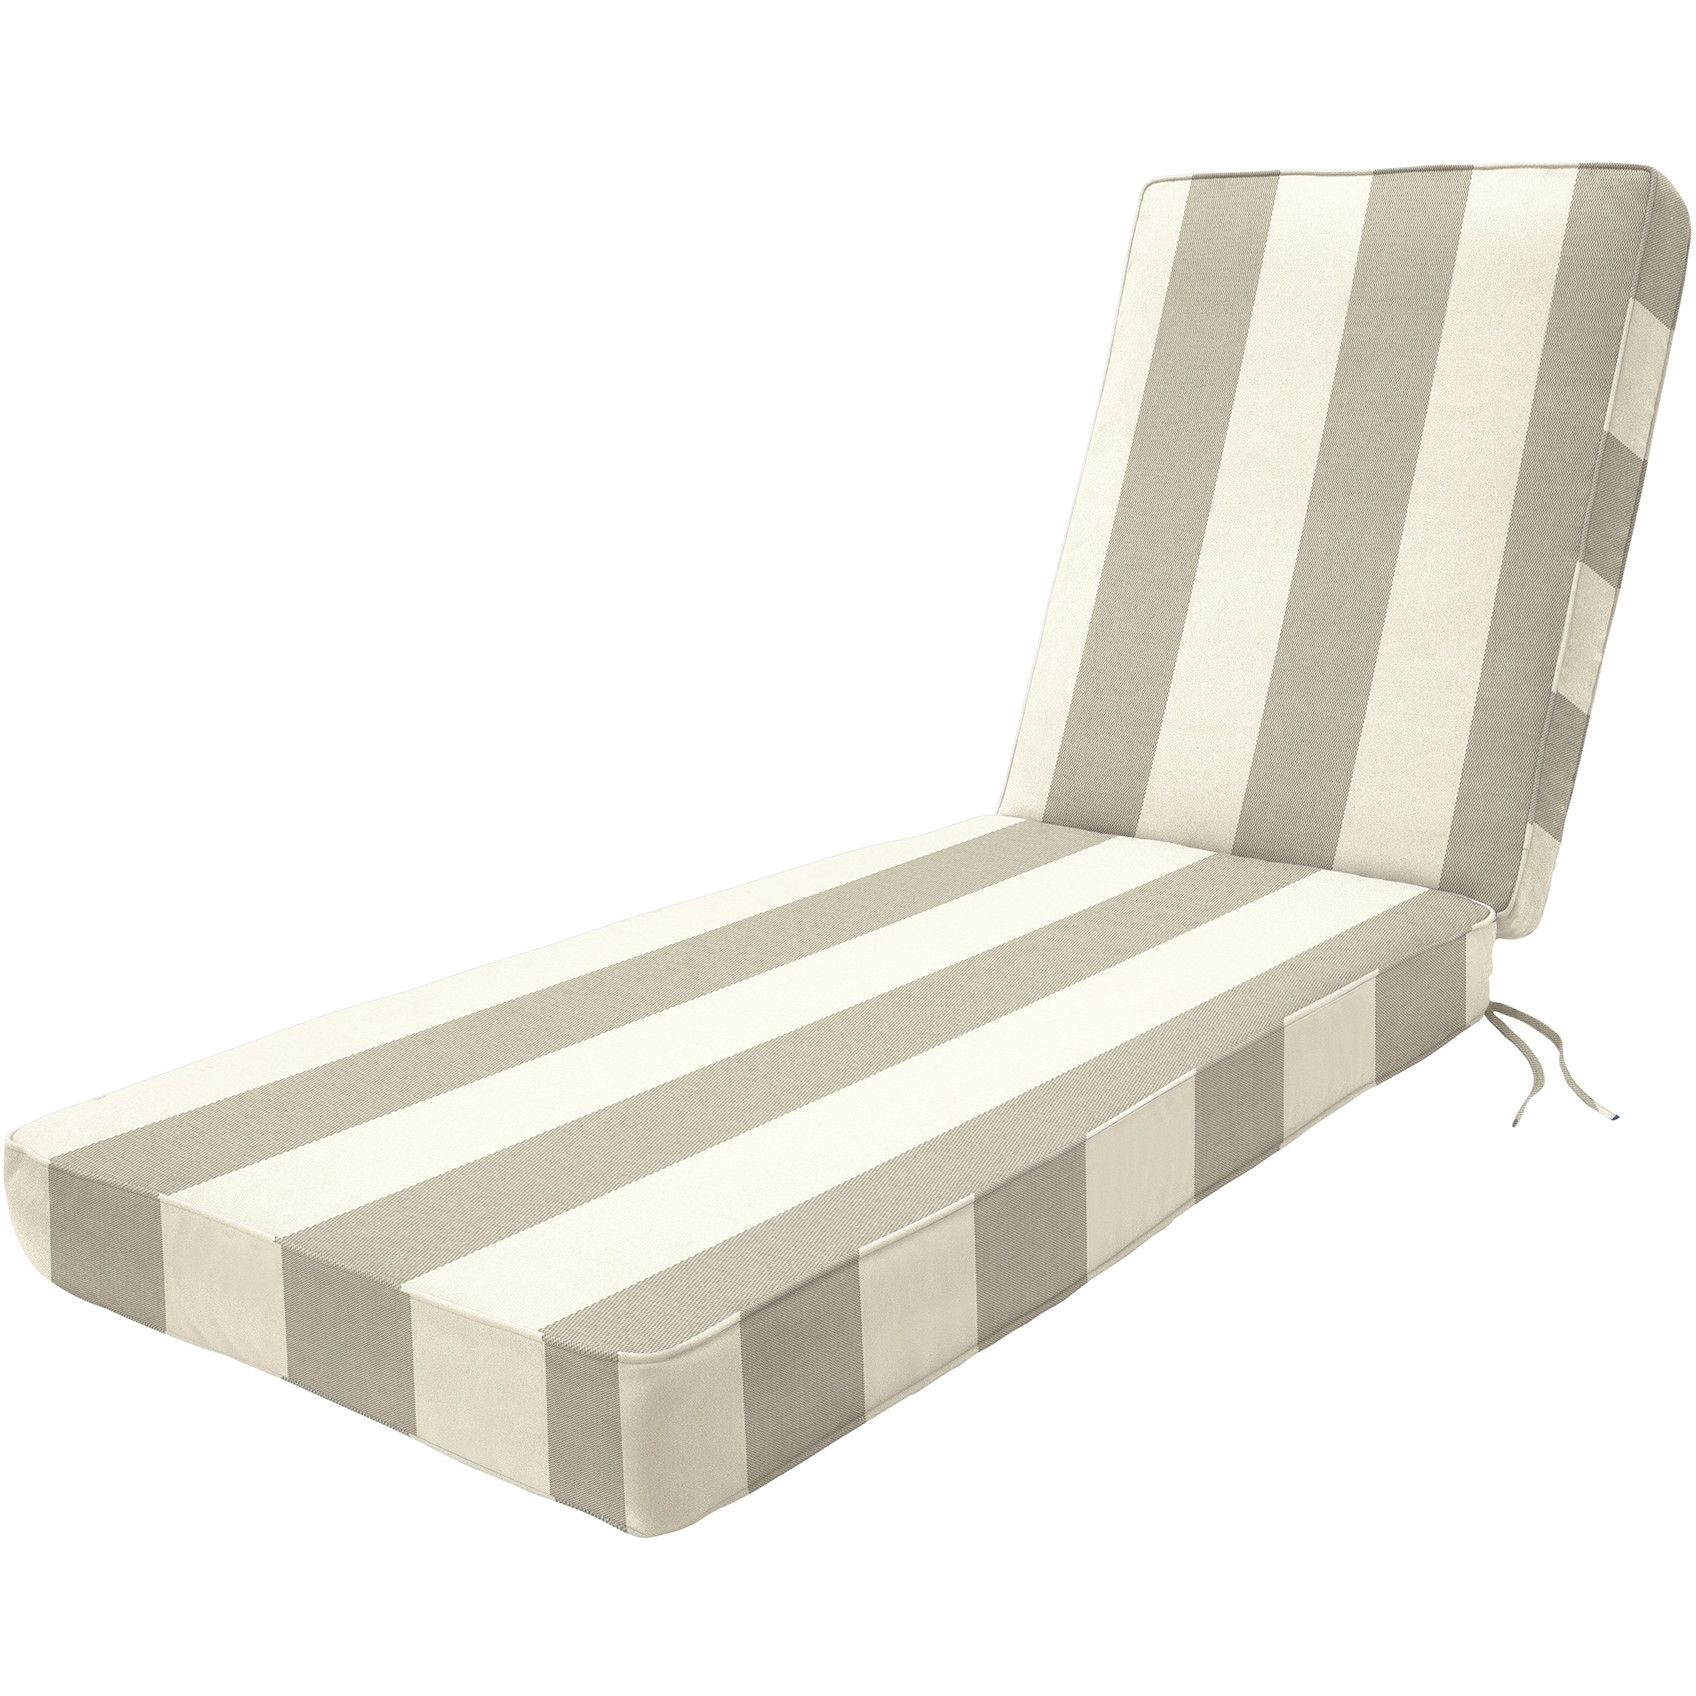 Most Popular Chaise Lounge Chair Outdoor Cushions • Lounge Chairs Ideas Pertaining To Chaise Lounge Chair Outdoor Cushions (View 5 of 15)